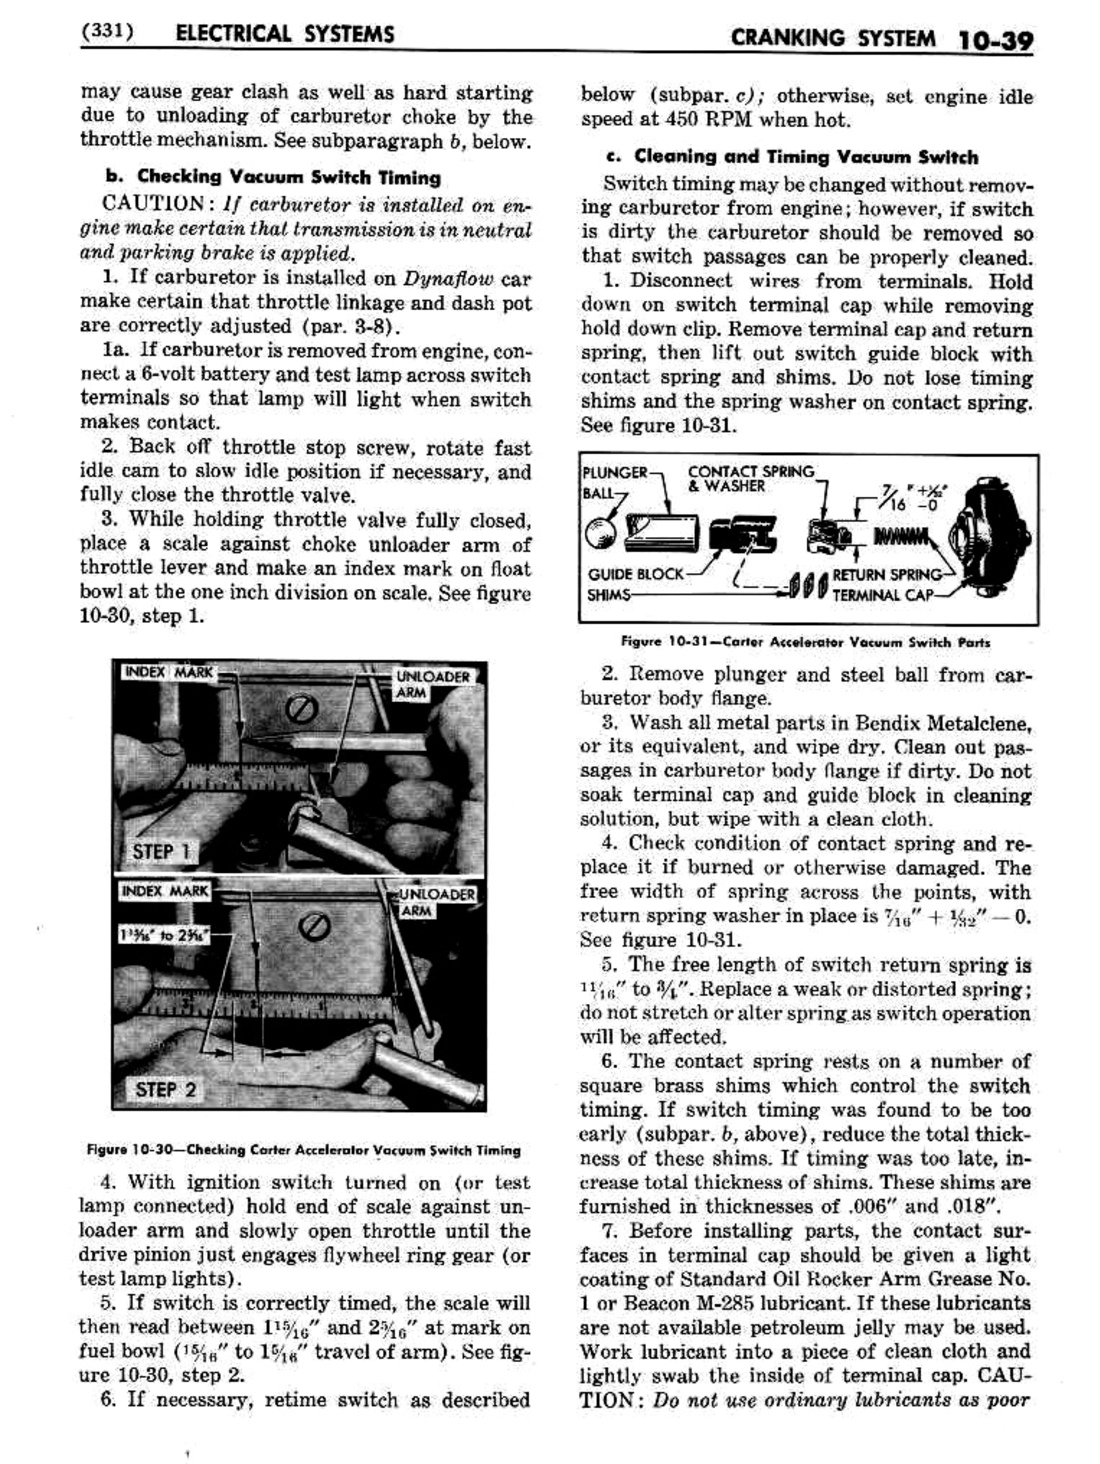 n_11 1951 Buick Shop Manual - Electrical Systems-039-039.jpg